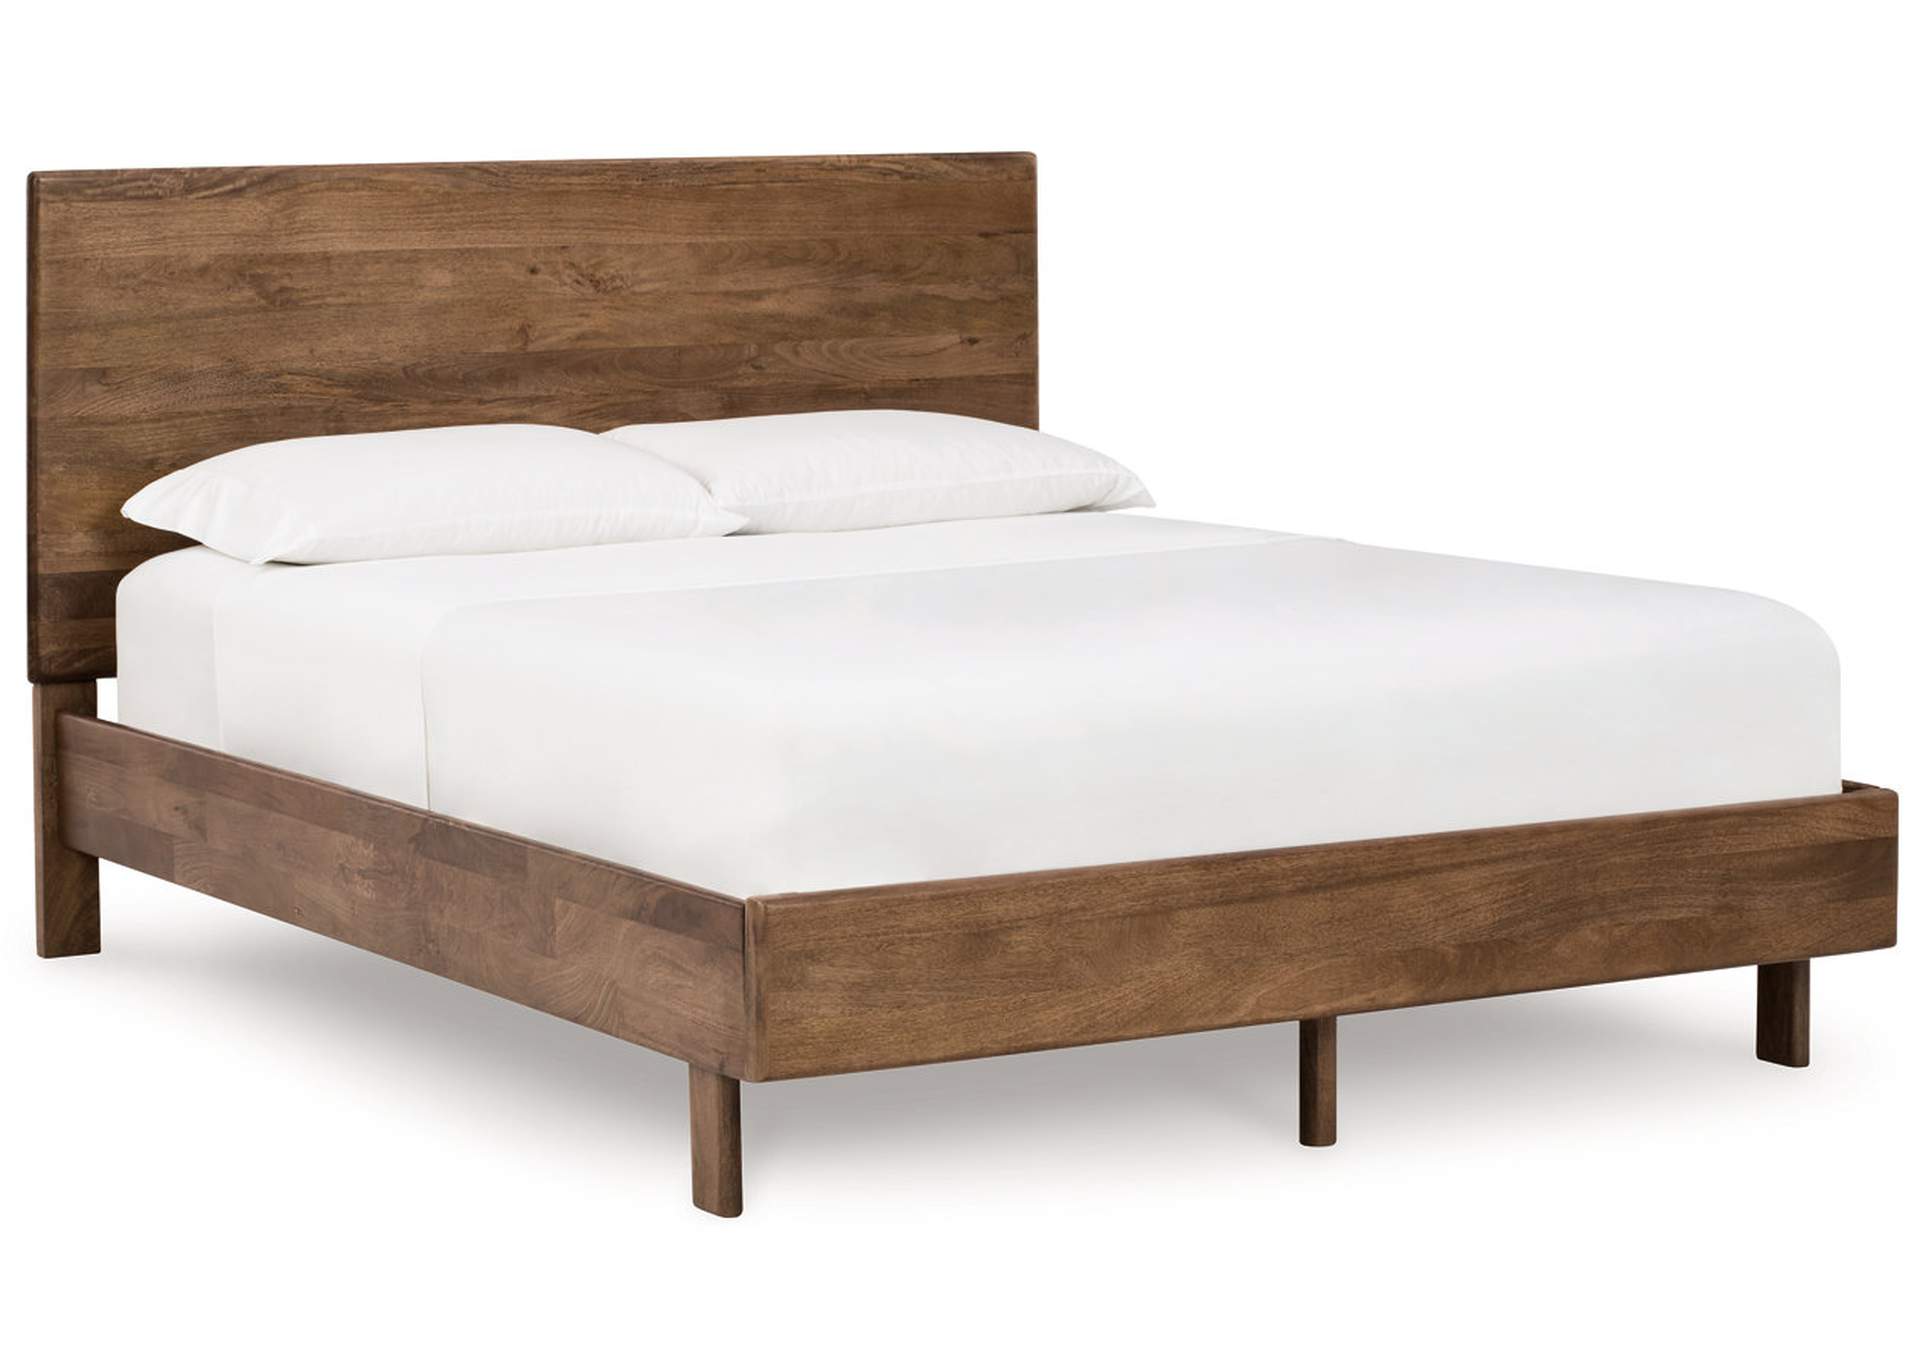 Isanti King Panel Bed with Dresser,Millennium